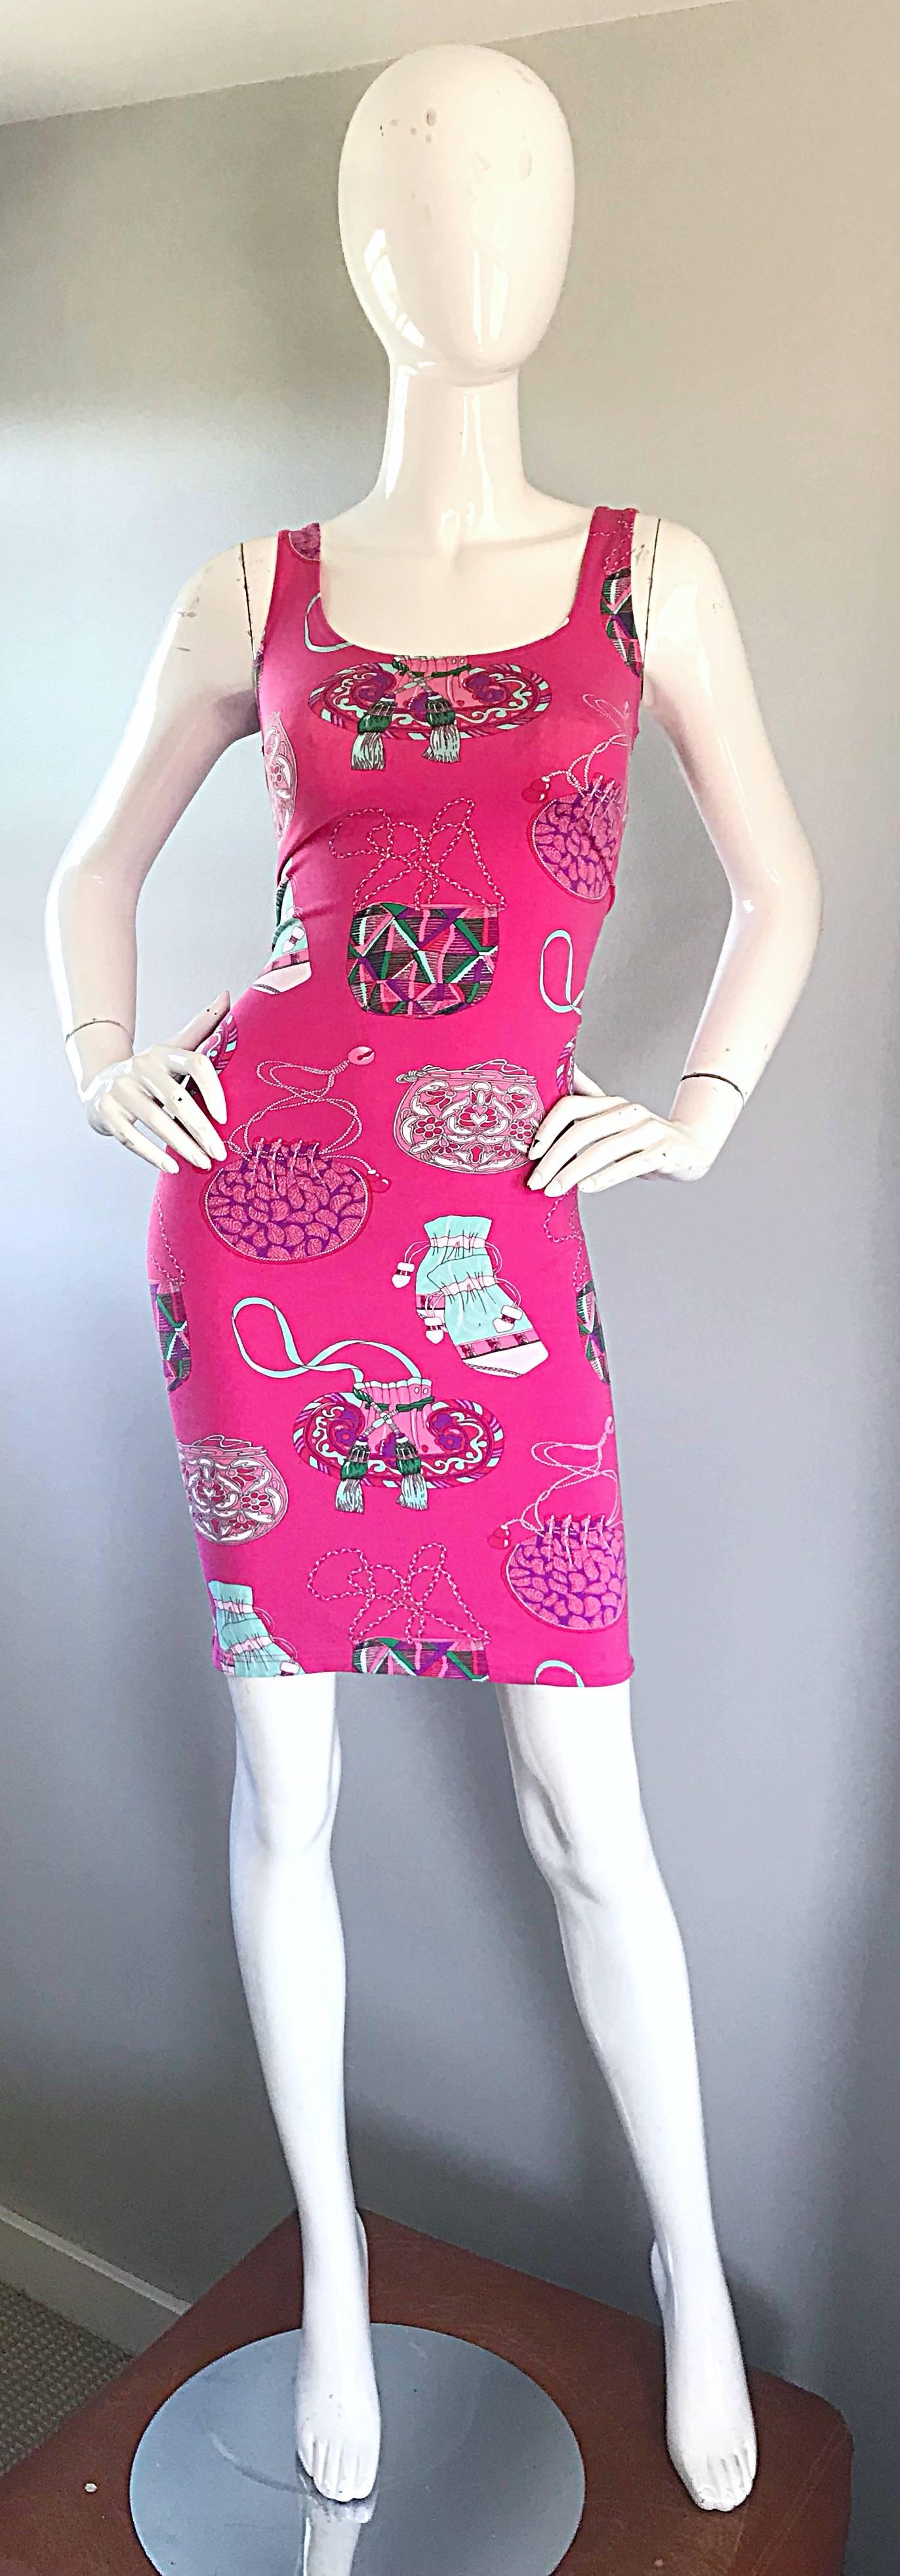 Sexy and fun new with tags vintage MANUEL CANOVAS hot pink bodycon 90s dress! Features handbags from different eras throughout. Simply slips over the head and stretches to fit. Great with sandals or wedges for day, and heels or boots for night. 
In